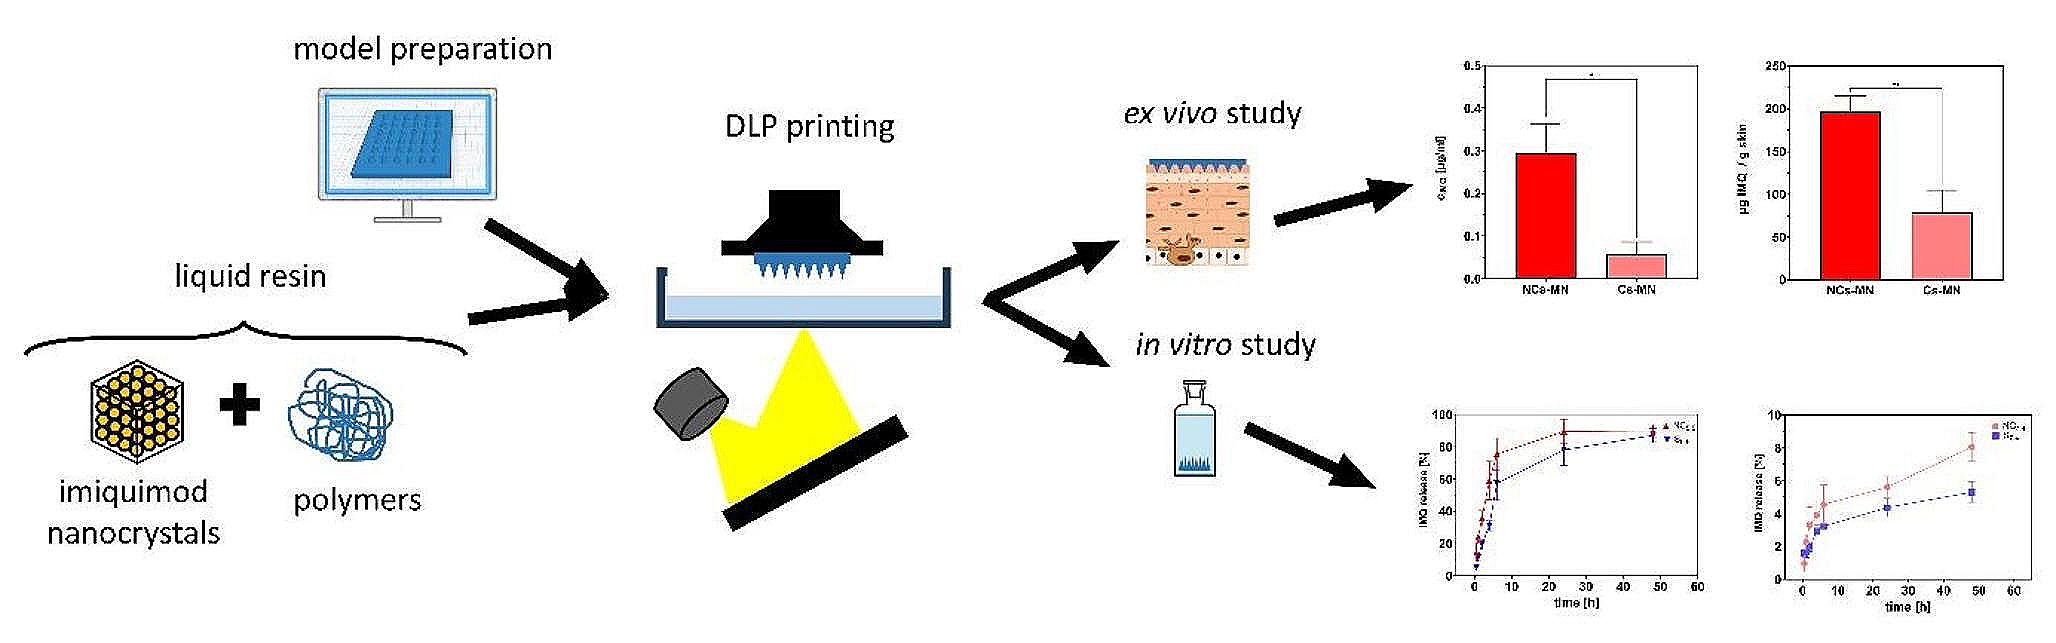 Imiquimod nanocrystal-loaded dissolving microneedles prepared by DLP printing